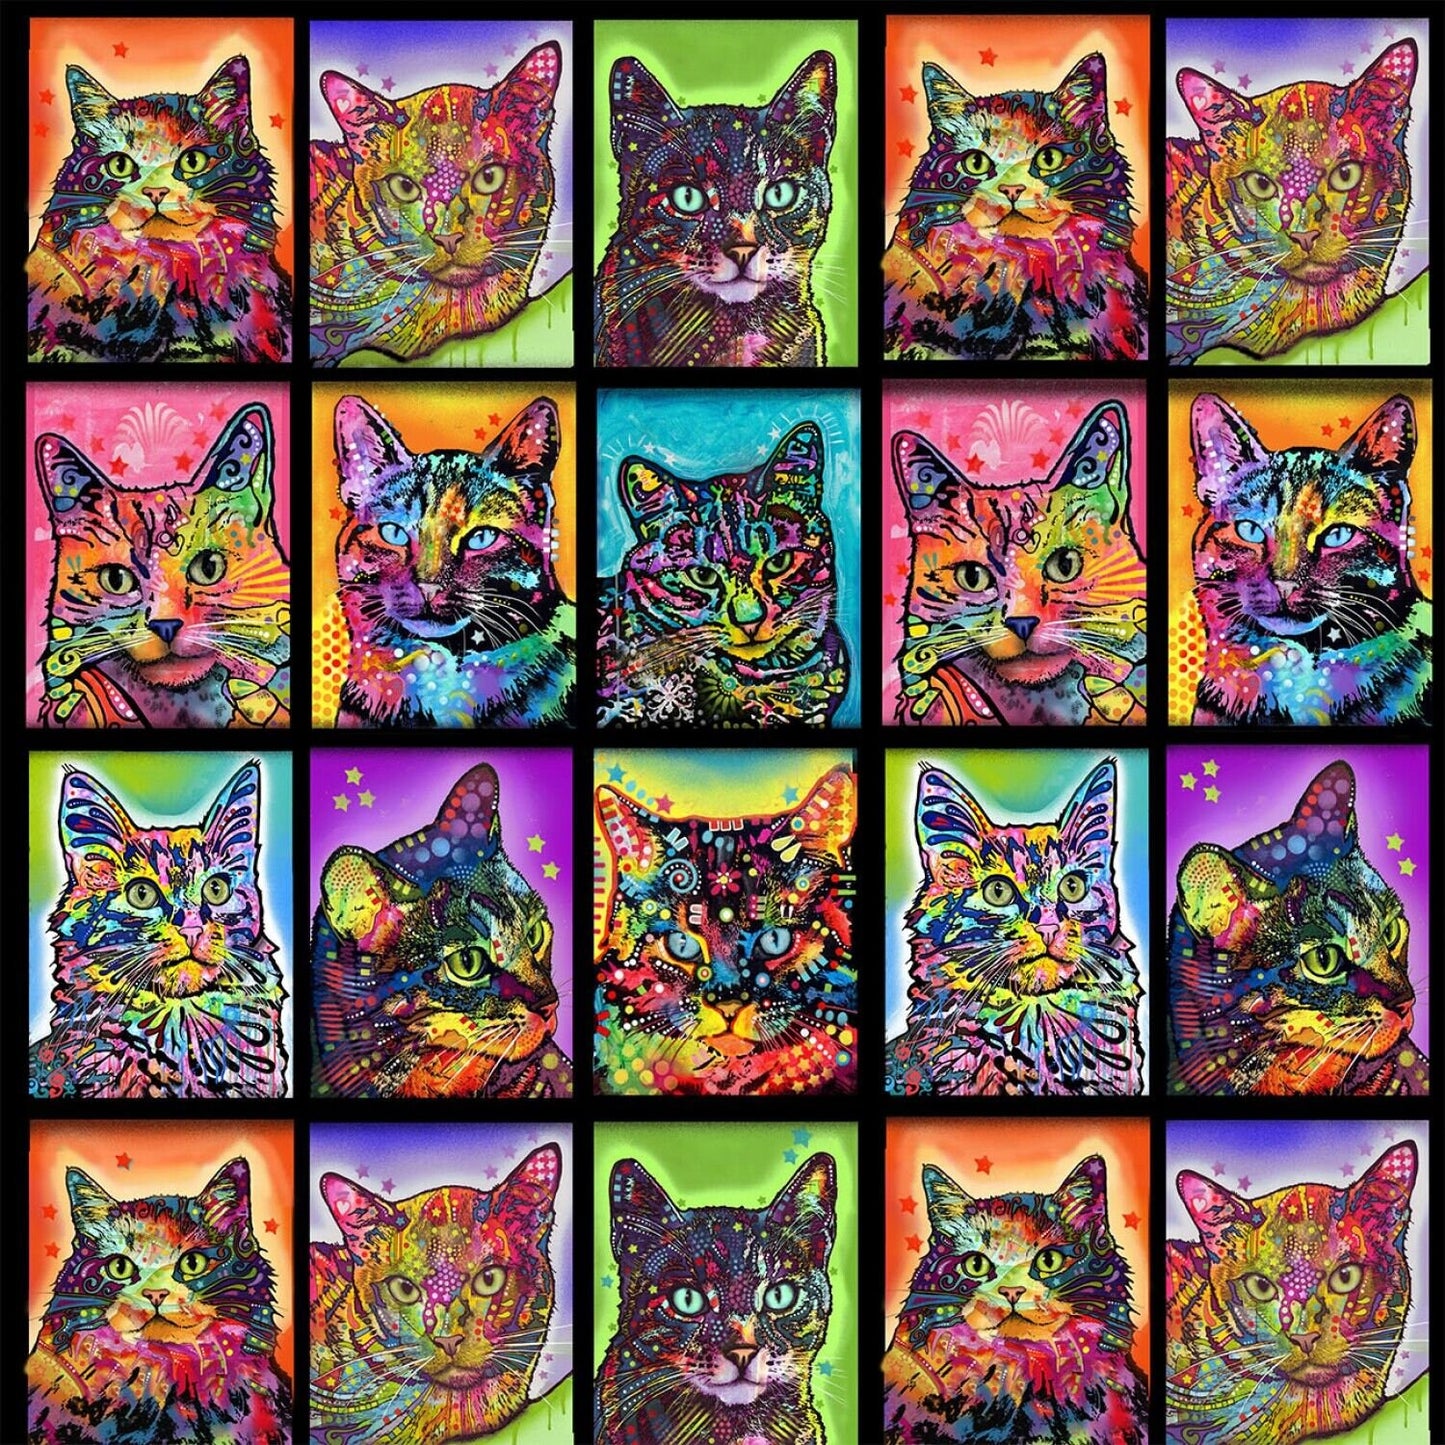 Crazy for Cats Multi Crazy For Cats Patch 10240-X (Patches are approx. 4" X 3.75") Cotton Woven Fabric